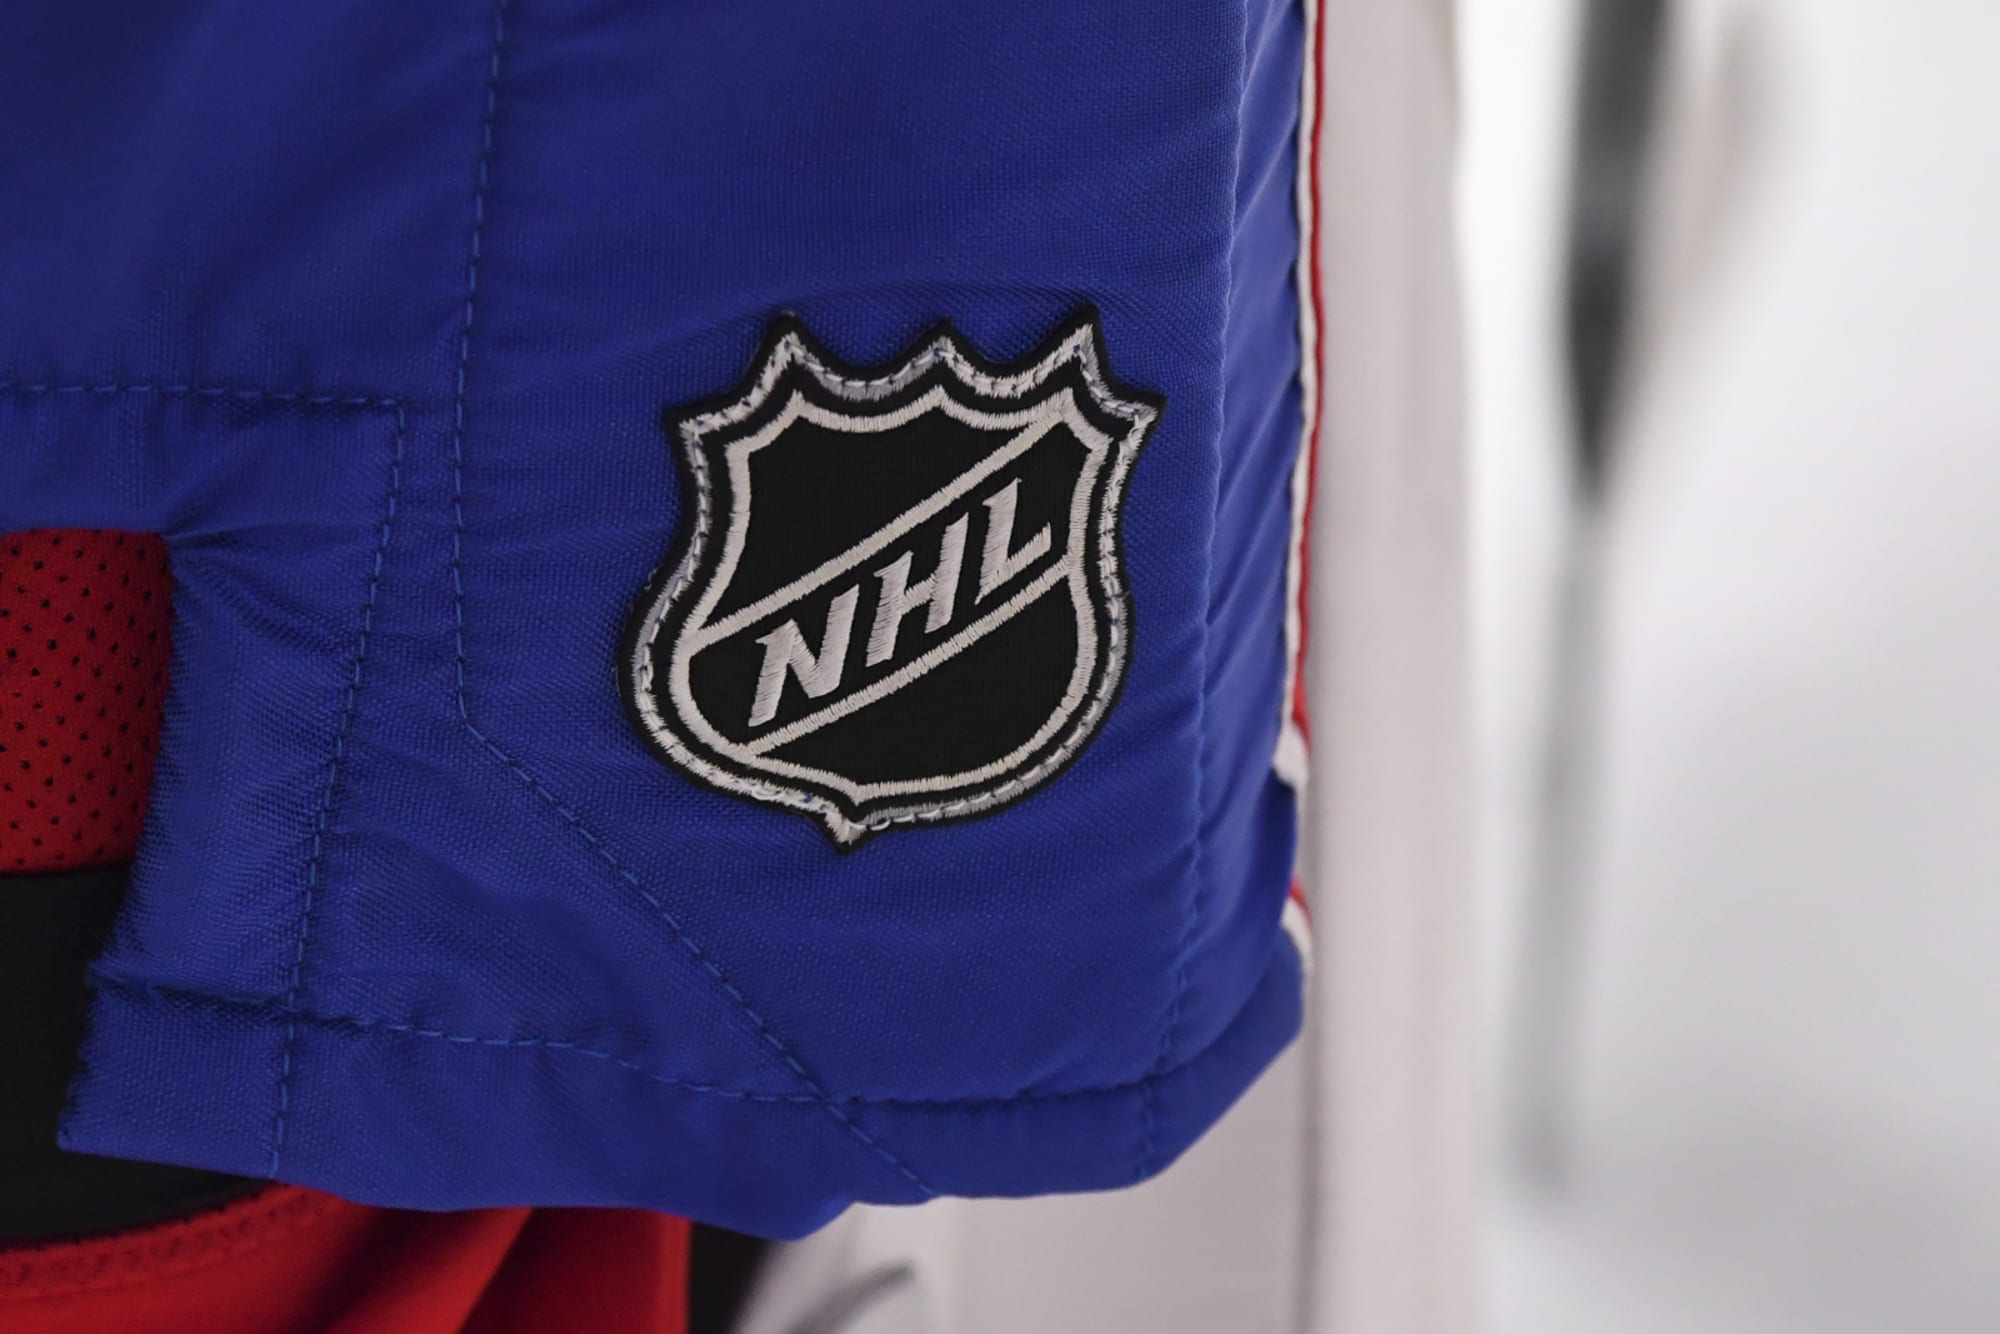 Why Fanatics Emerged as the NHL's New Jersey Supplier